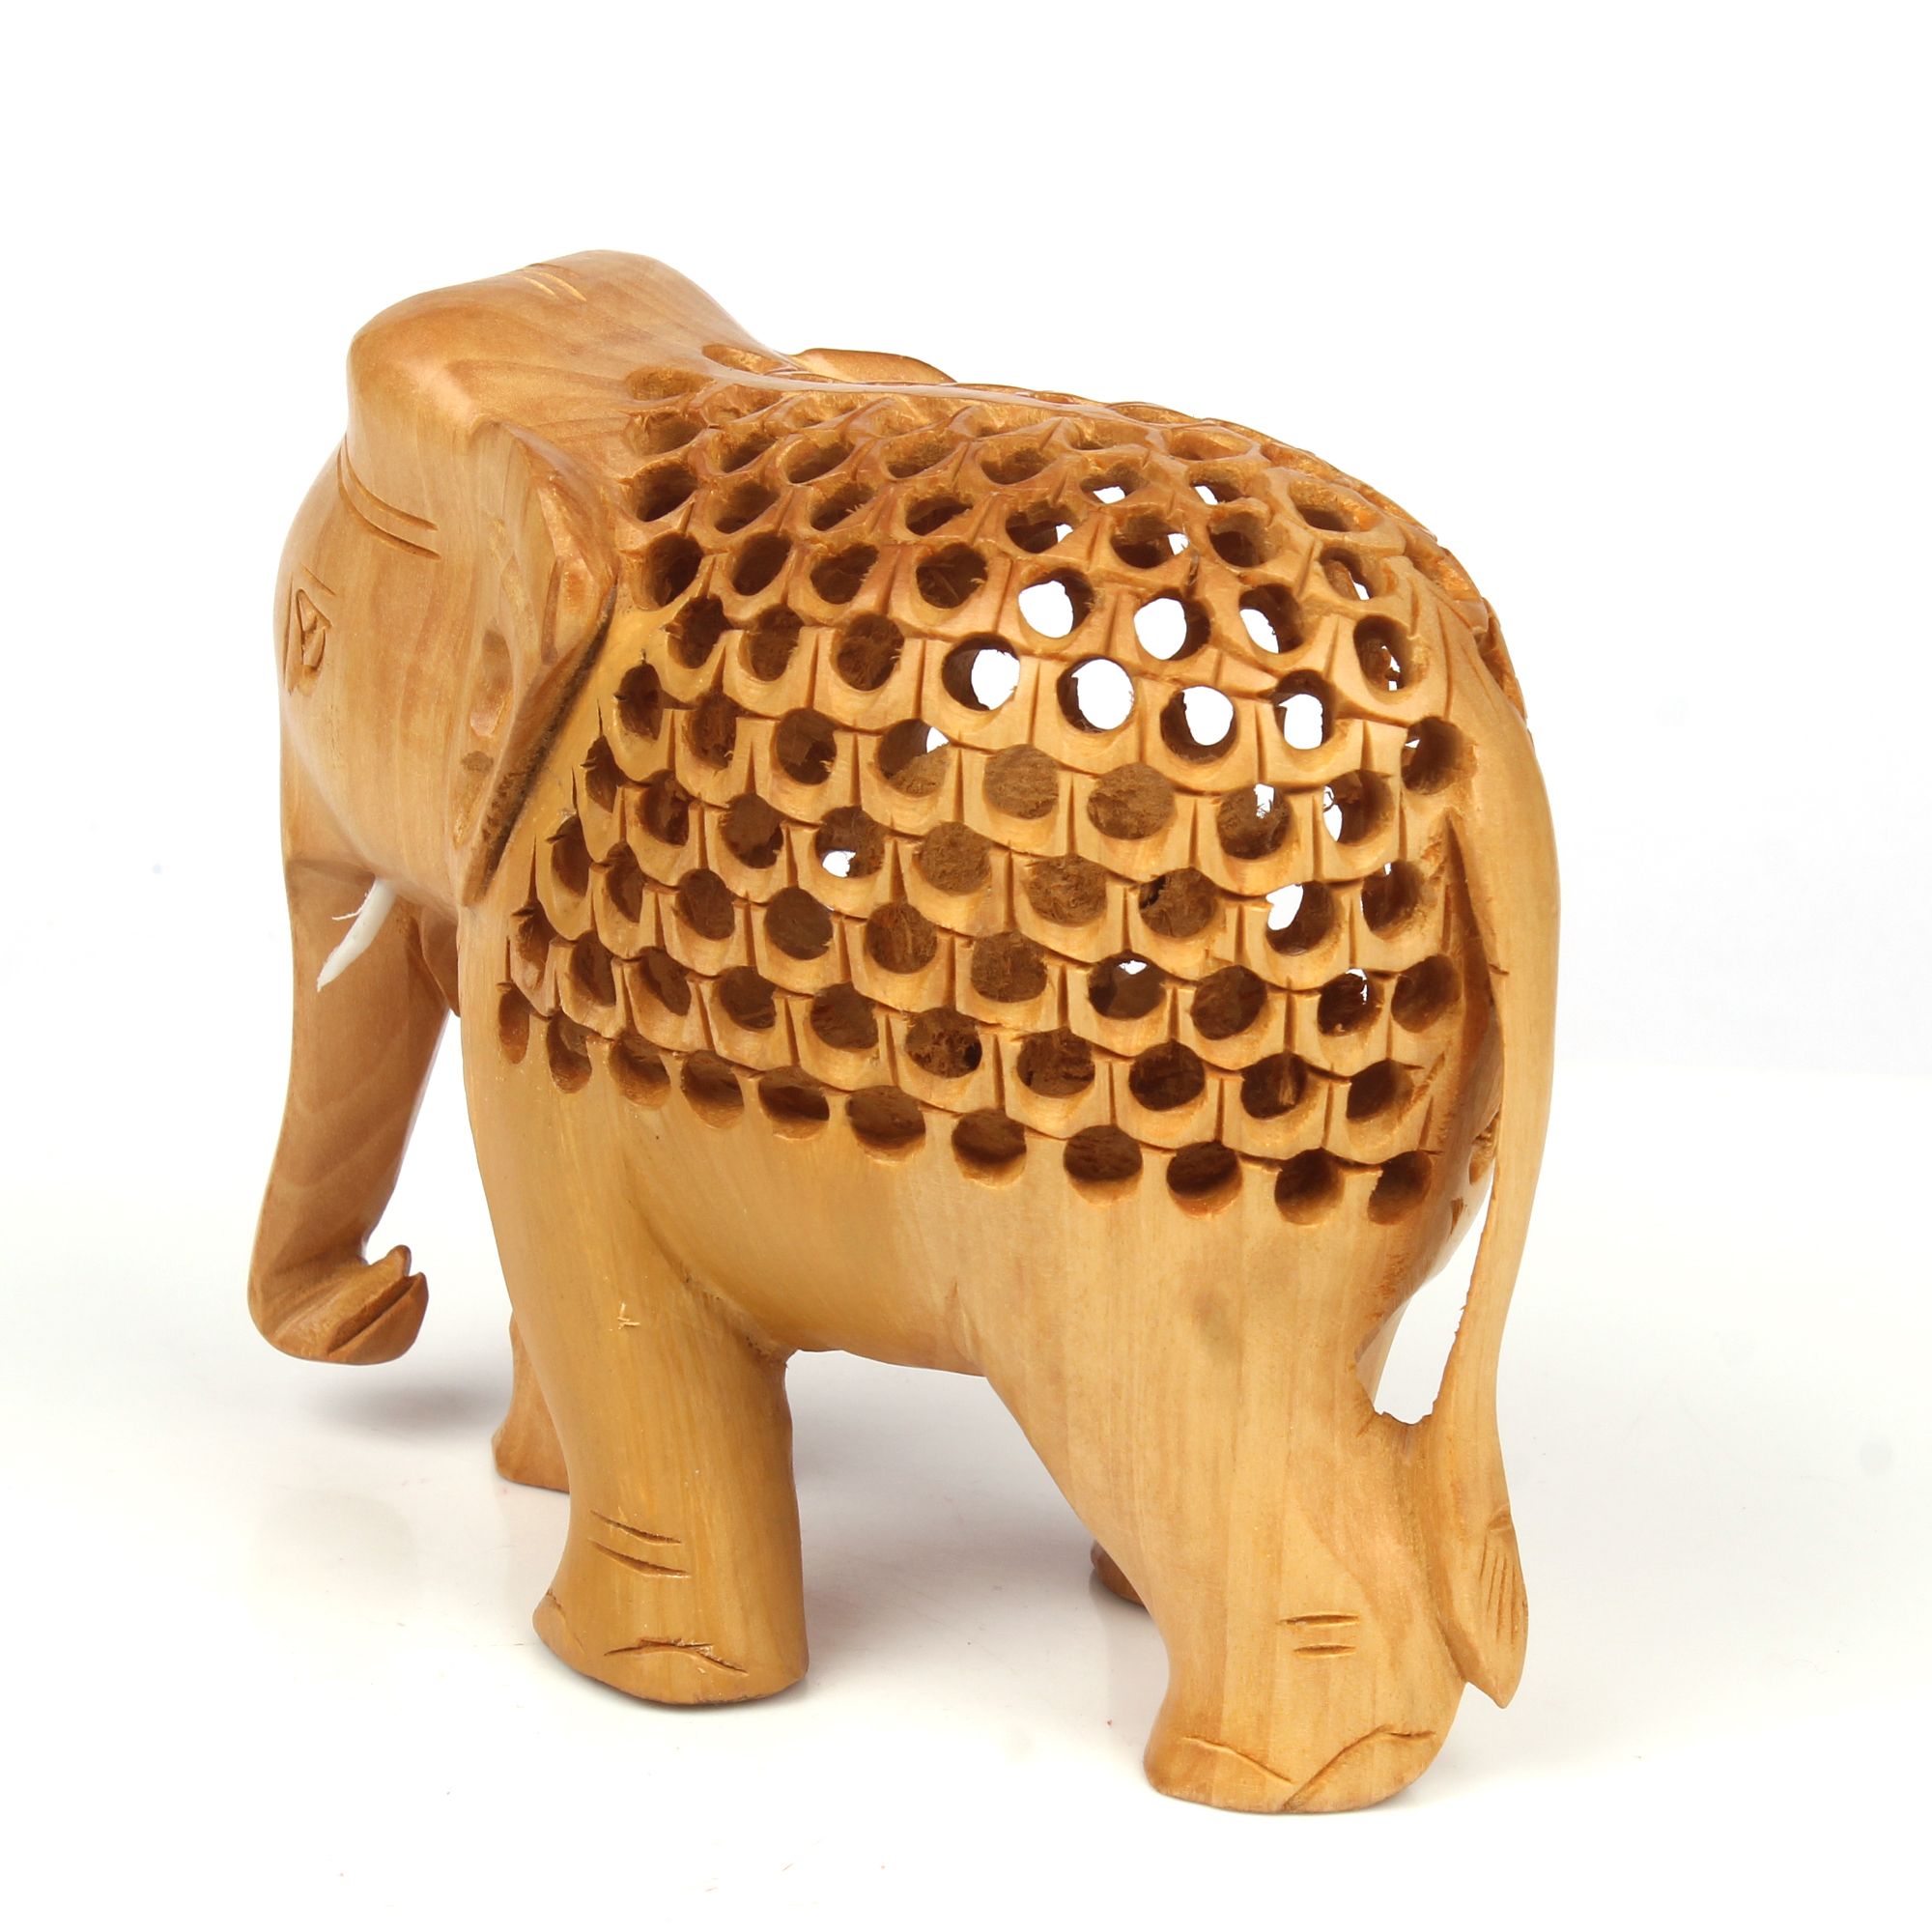 Tribes India Handcarved Jali Wooden Elephant With Baby in Womb